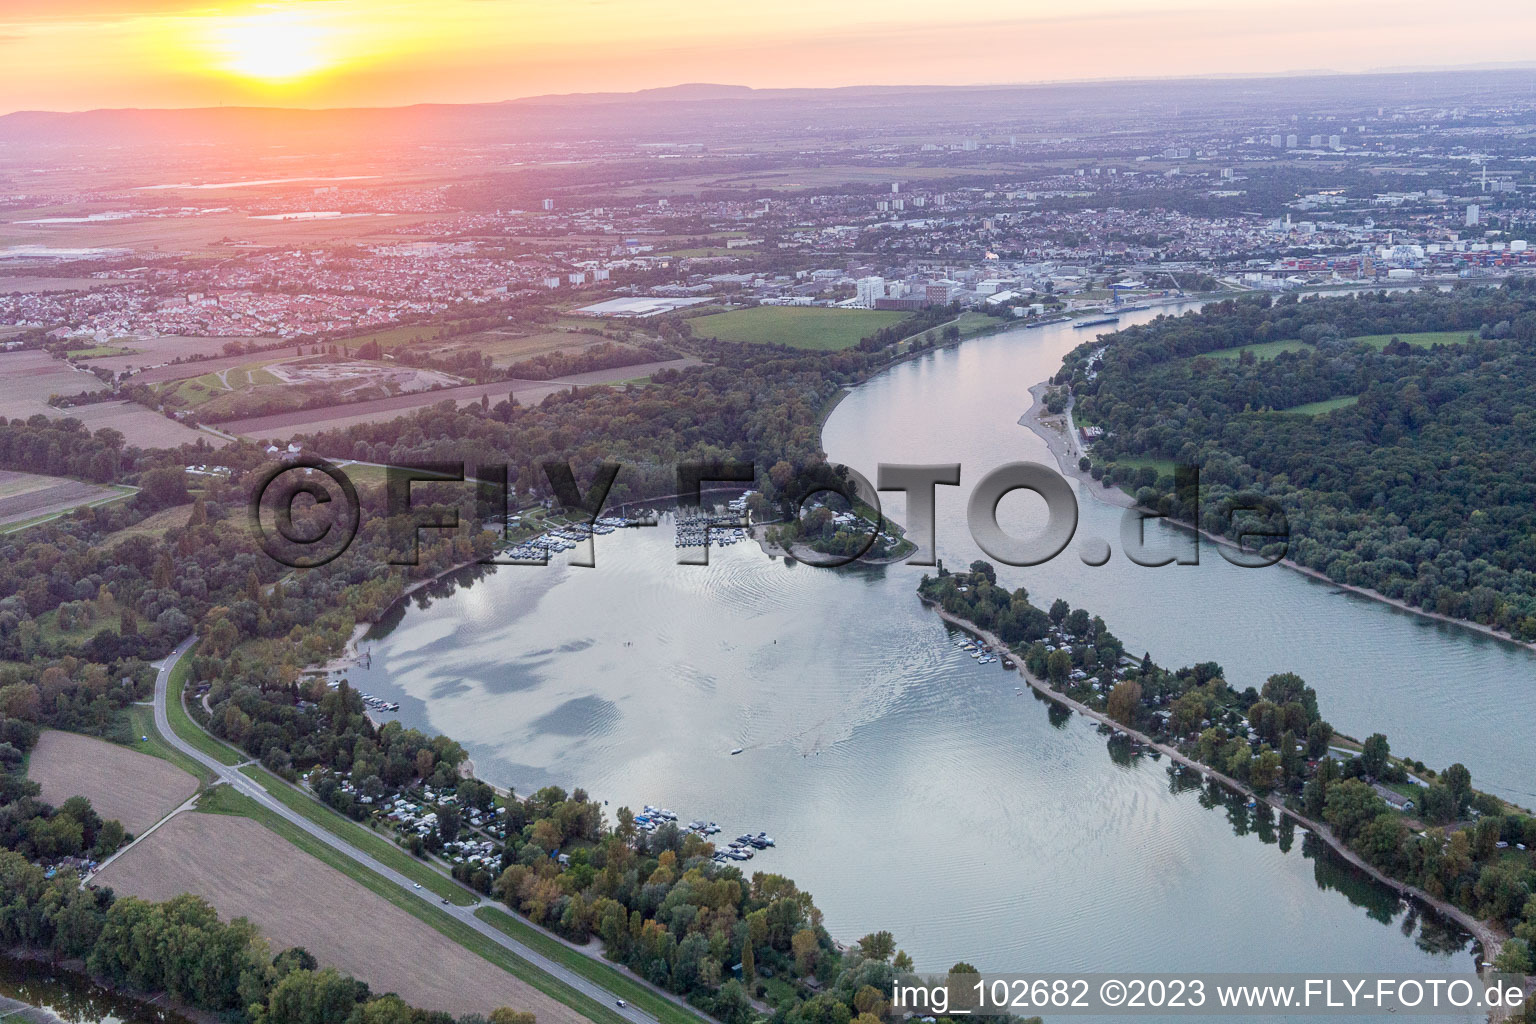 Aerial view of Altrip in the state Rhineland-Palatinate, Germany